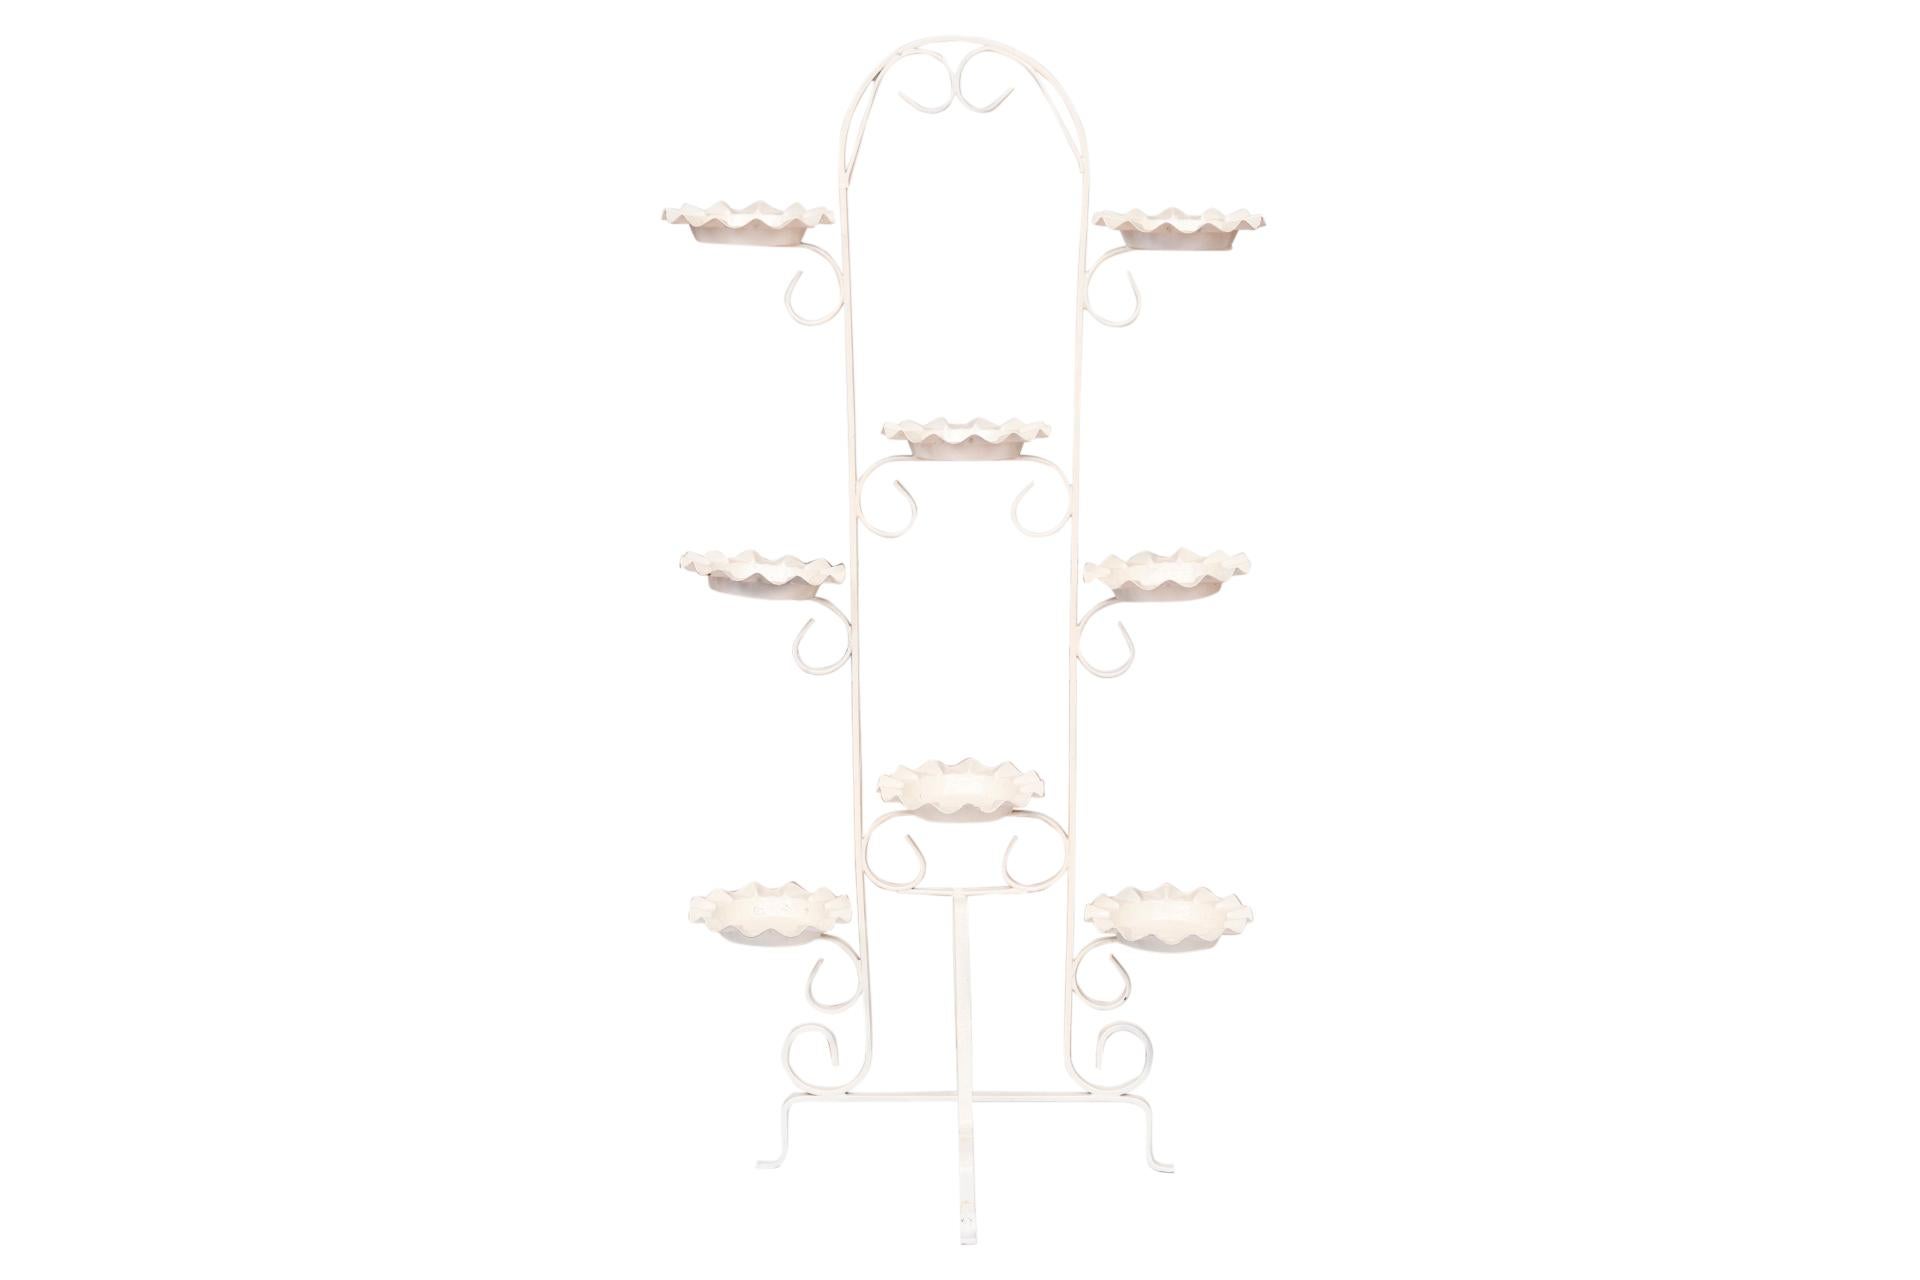 A white metal plant stand. A simple arch supported with scrolls has eight plates for holding plants. The base is formed with two cross pieces shaped into four feet.